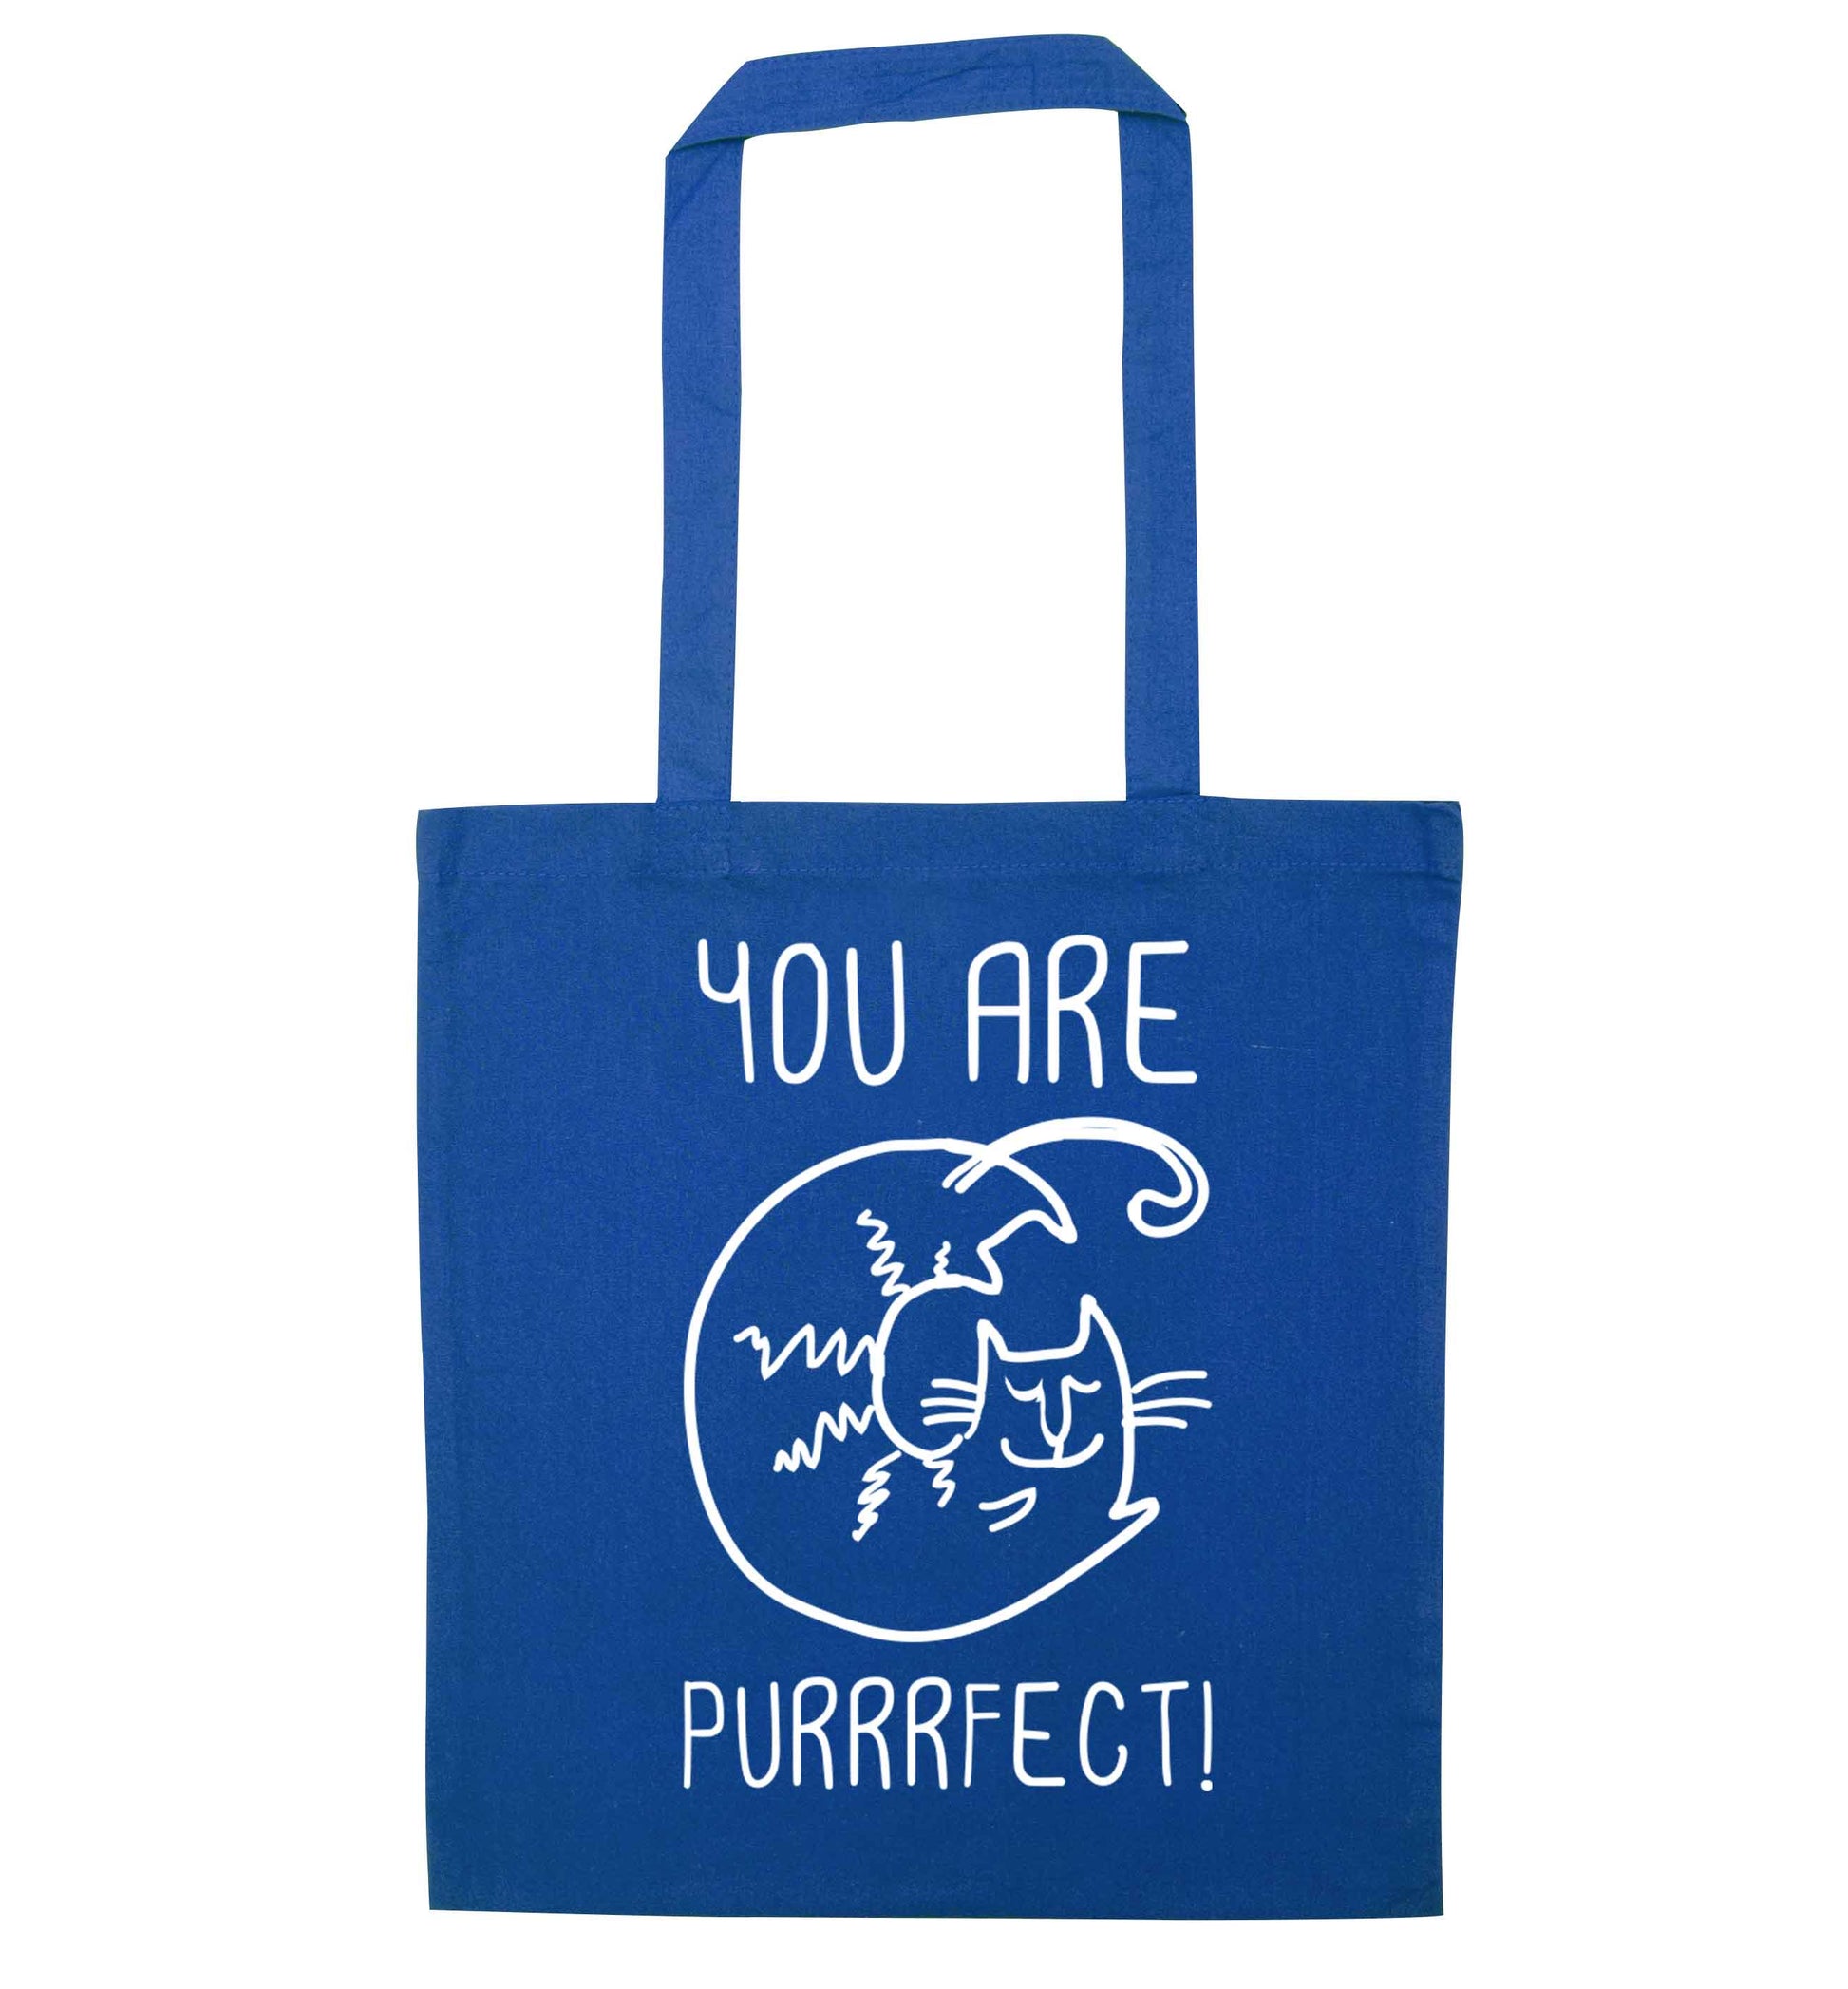 You are purrfect blue tote bag